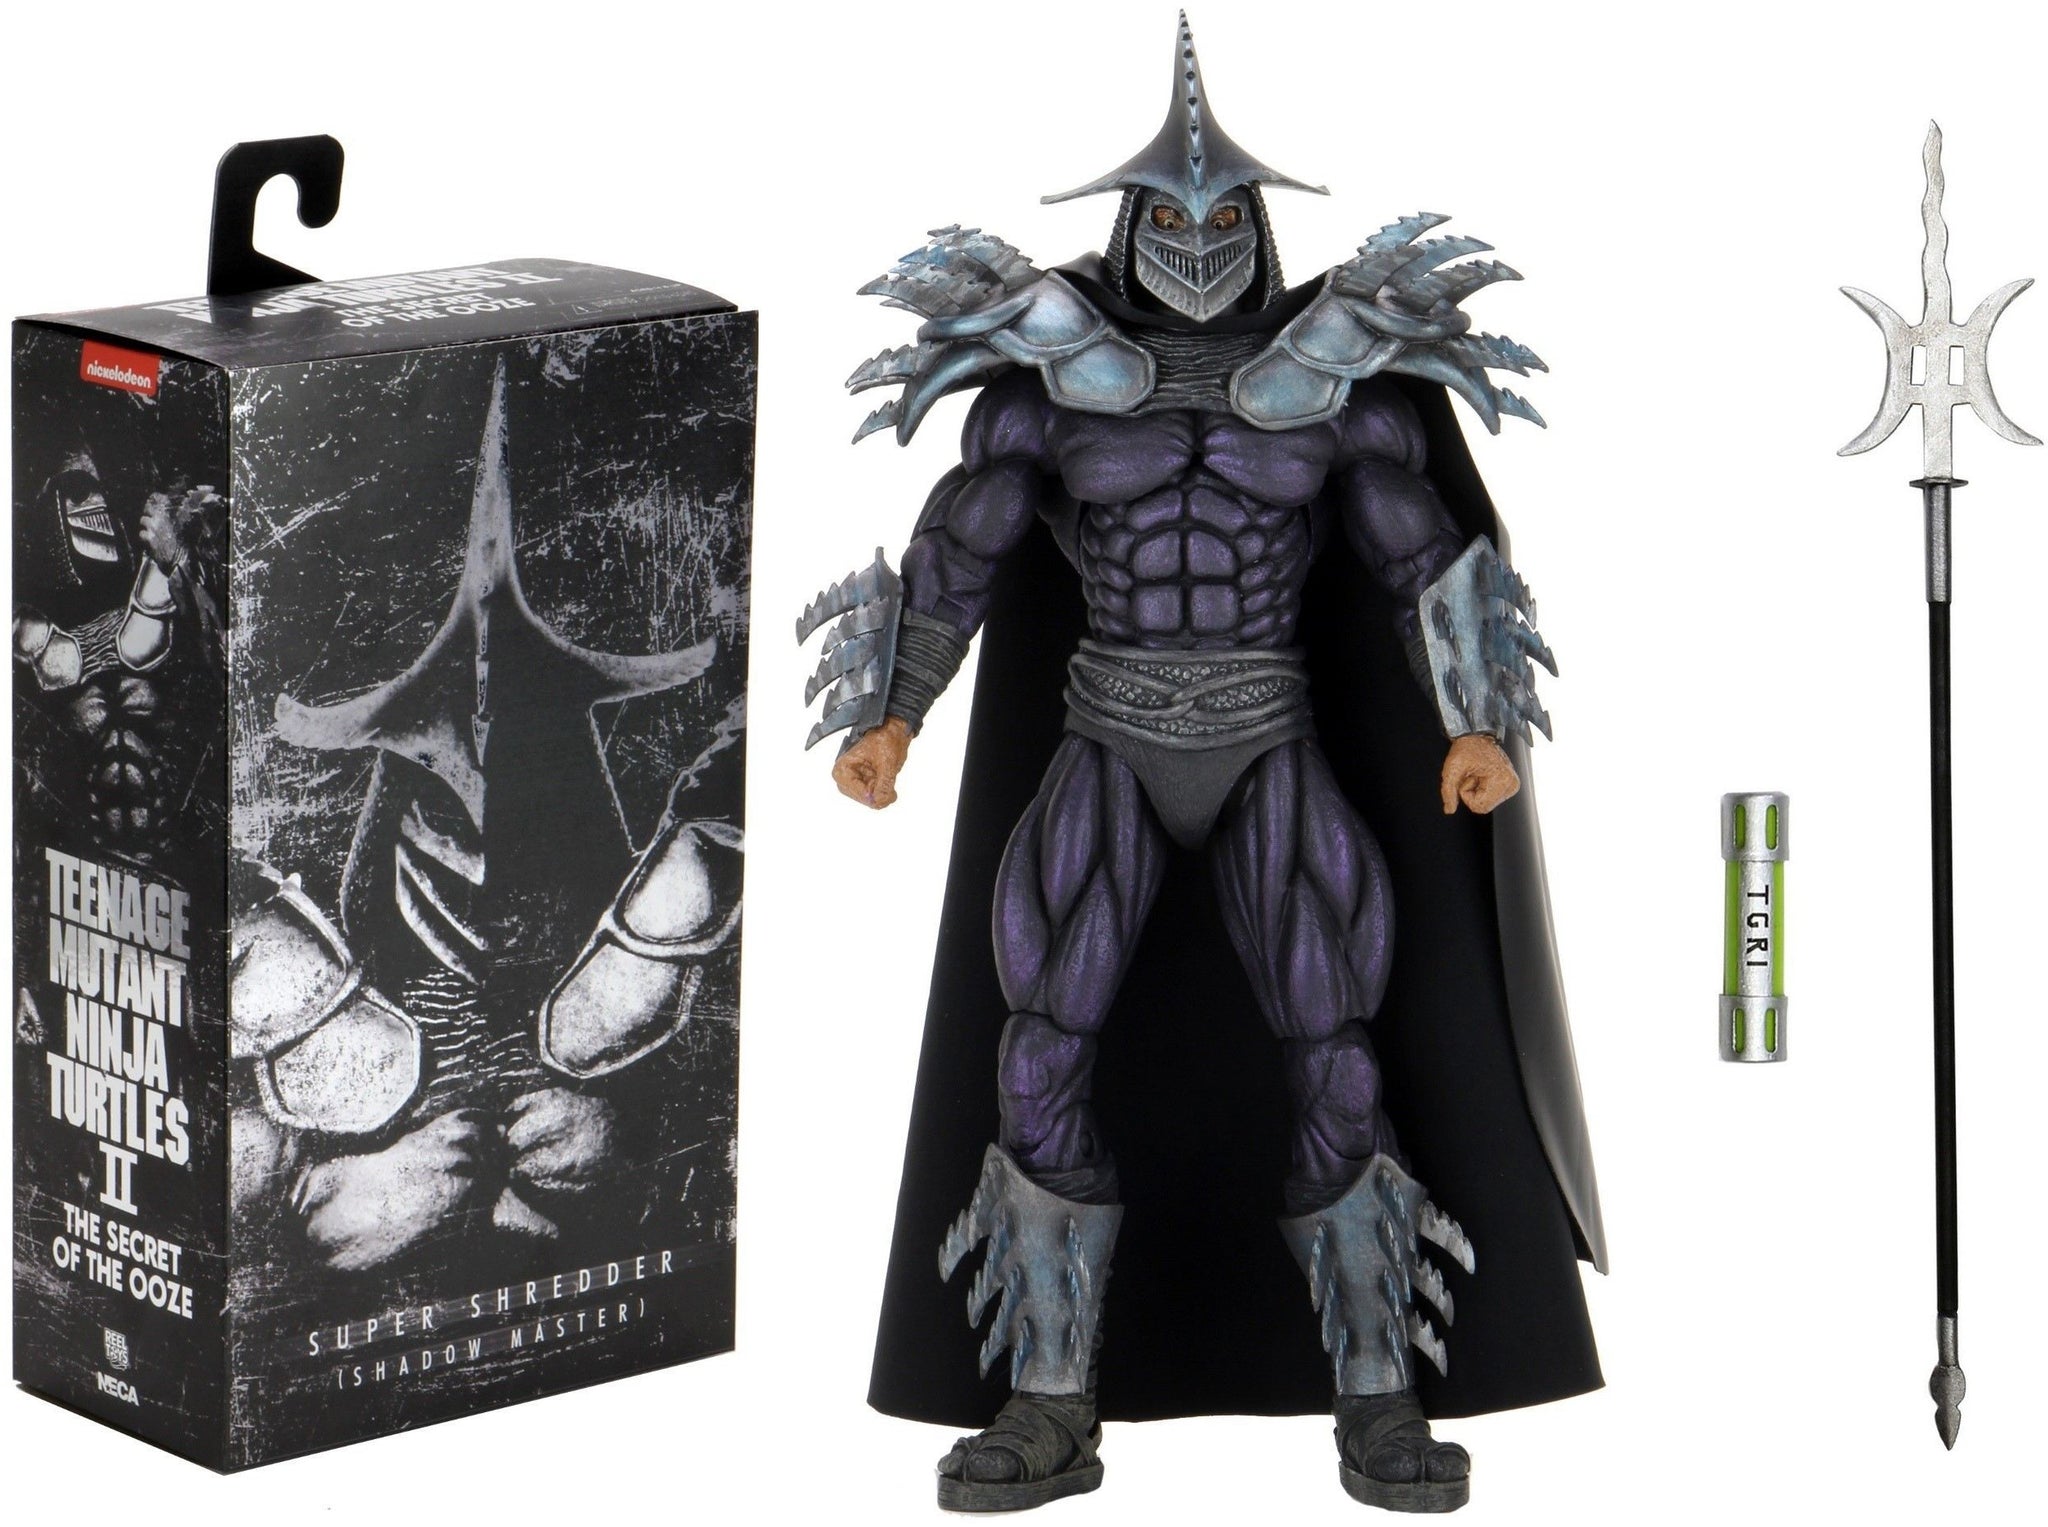 NECA SUPER SHREDDER (Shadow Master) Exclusive Action Figure Review 